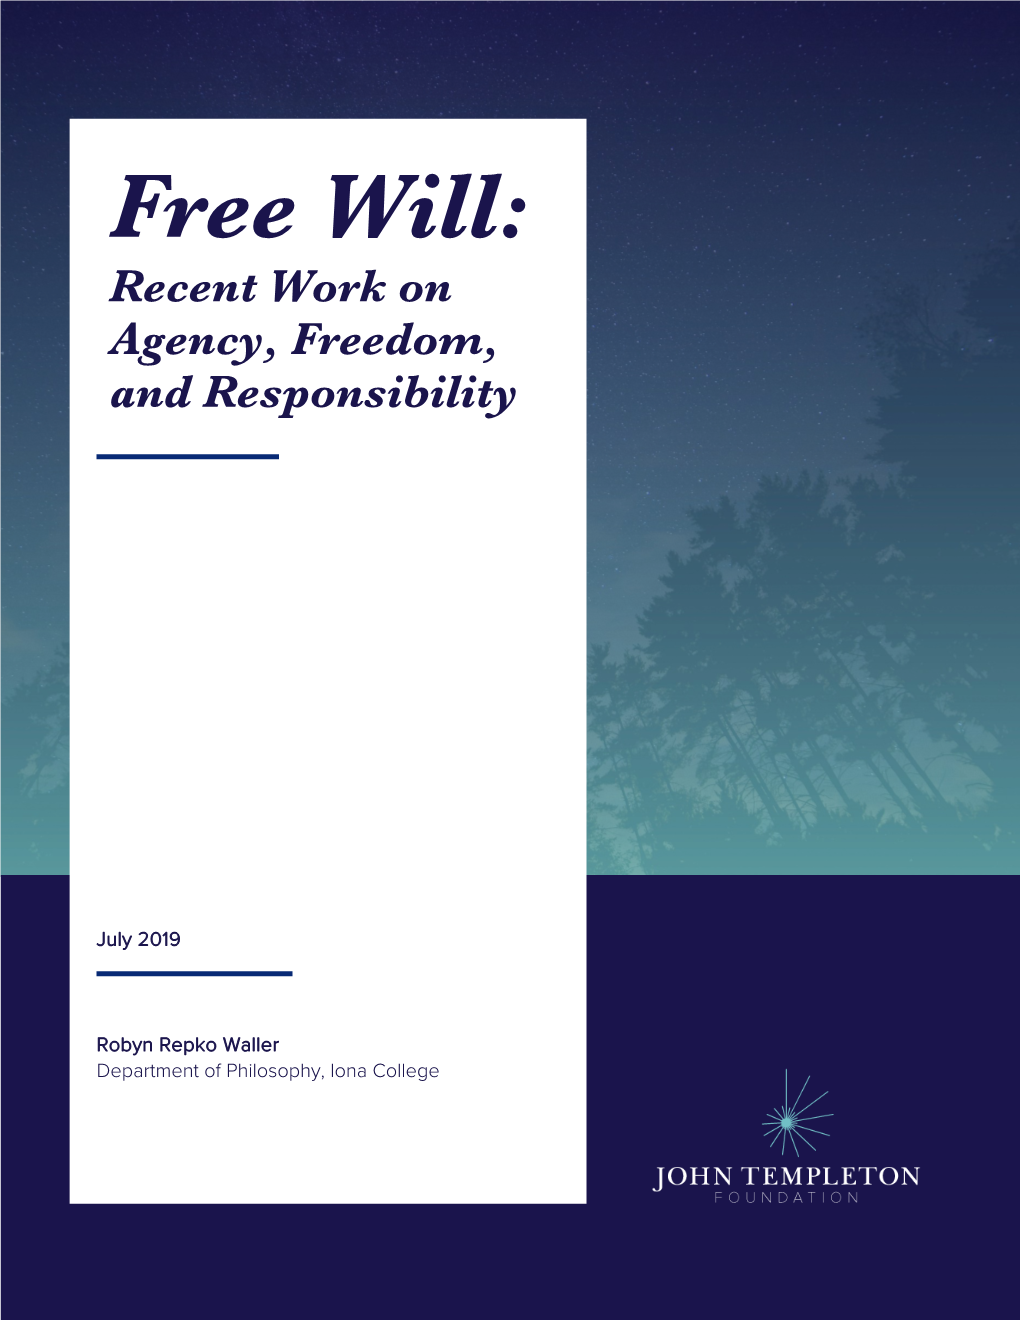 Free Will: Recent Work on Agency, Freedom, and Responsibility